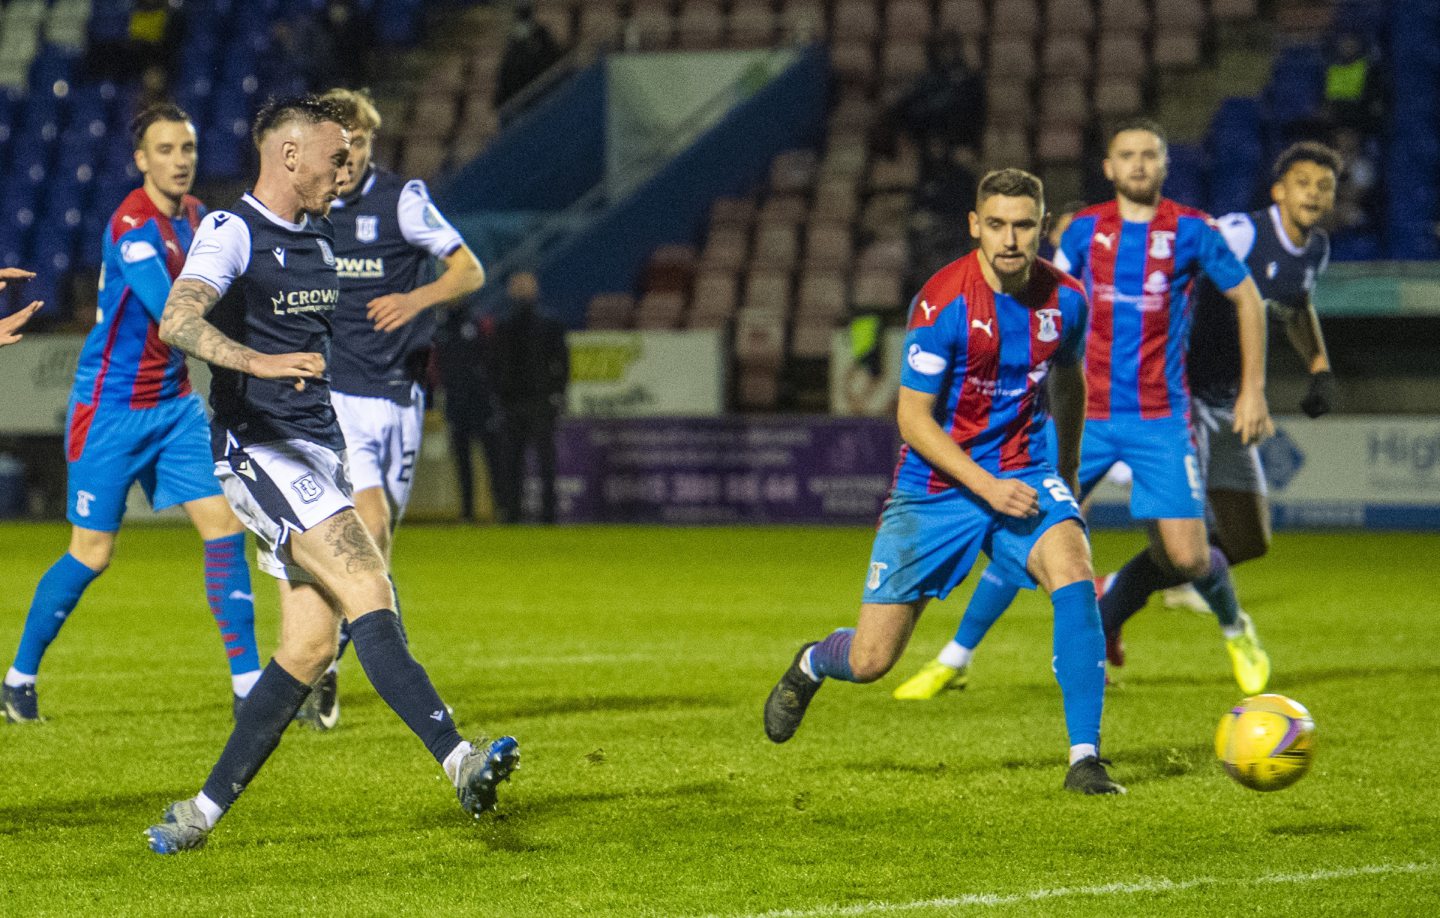 Dundee's Jordan McGhee slots home to make it 2-2 during the Scottish Championship match between Inverness Caledonian Thistle and Dundee at Tulloch Stadium, on December 12, 2020, in Inverness.